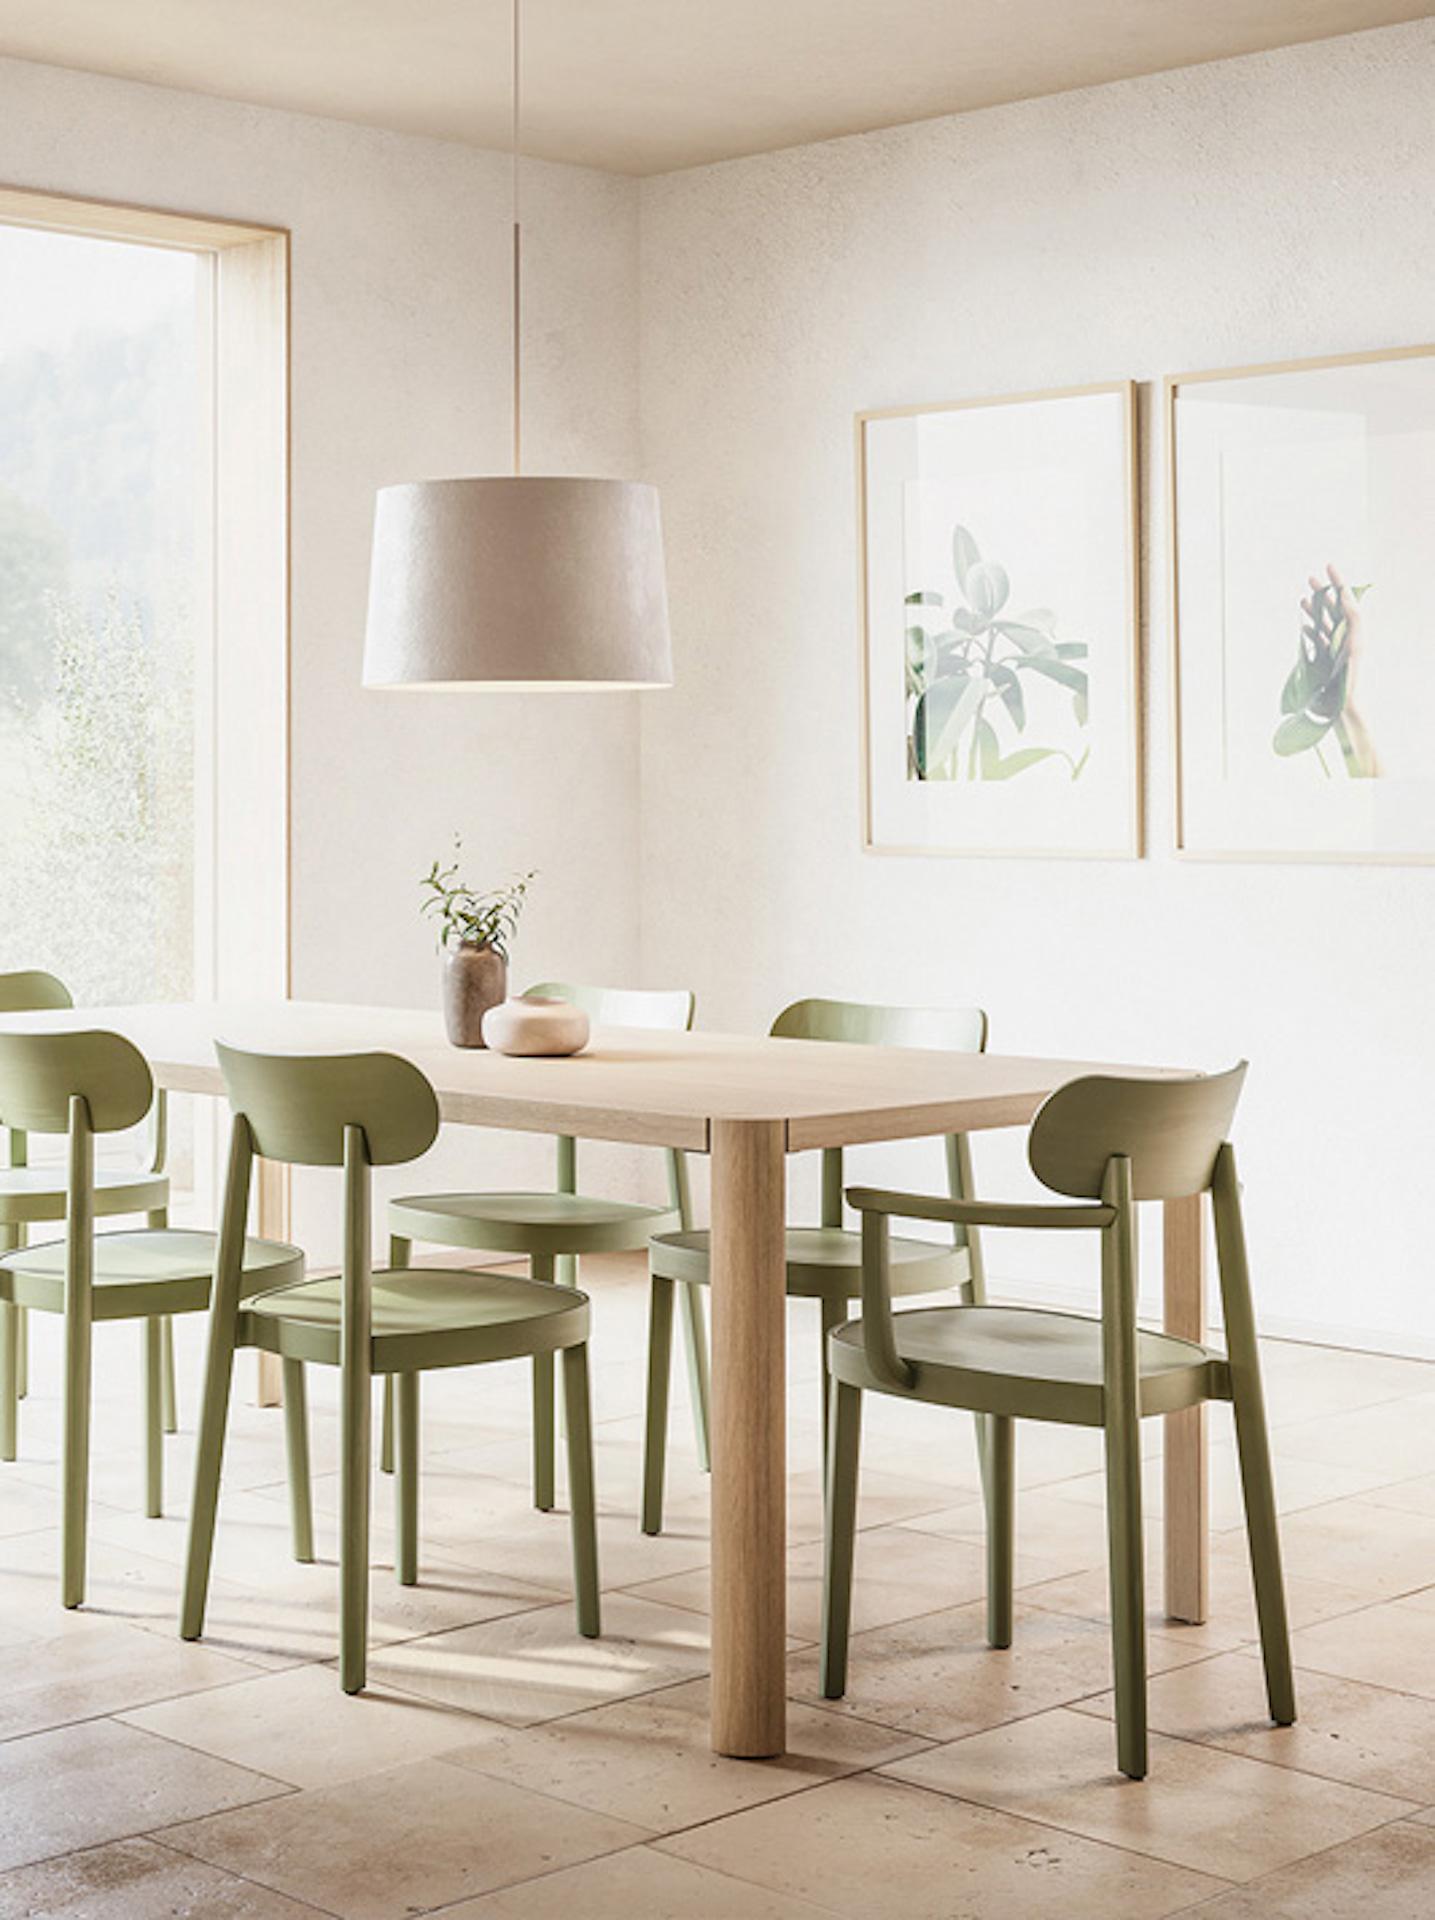 Minimalistic and honest, at the same time elegant and filigree
Minimalistic and honest, at the same time elegant and fine: the 118 chair is a classic wooden chair that adds subtle elegance to any dining table or restaurant. The principle of reducing